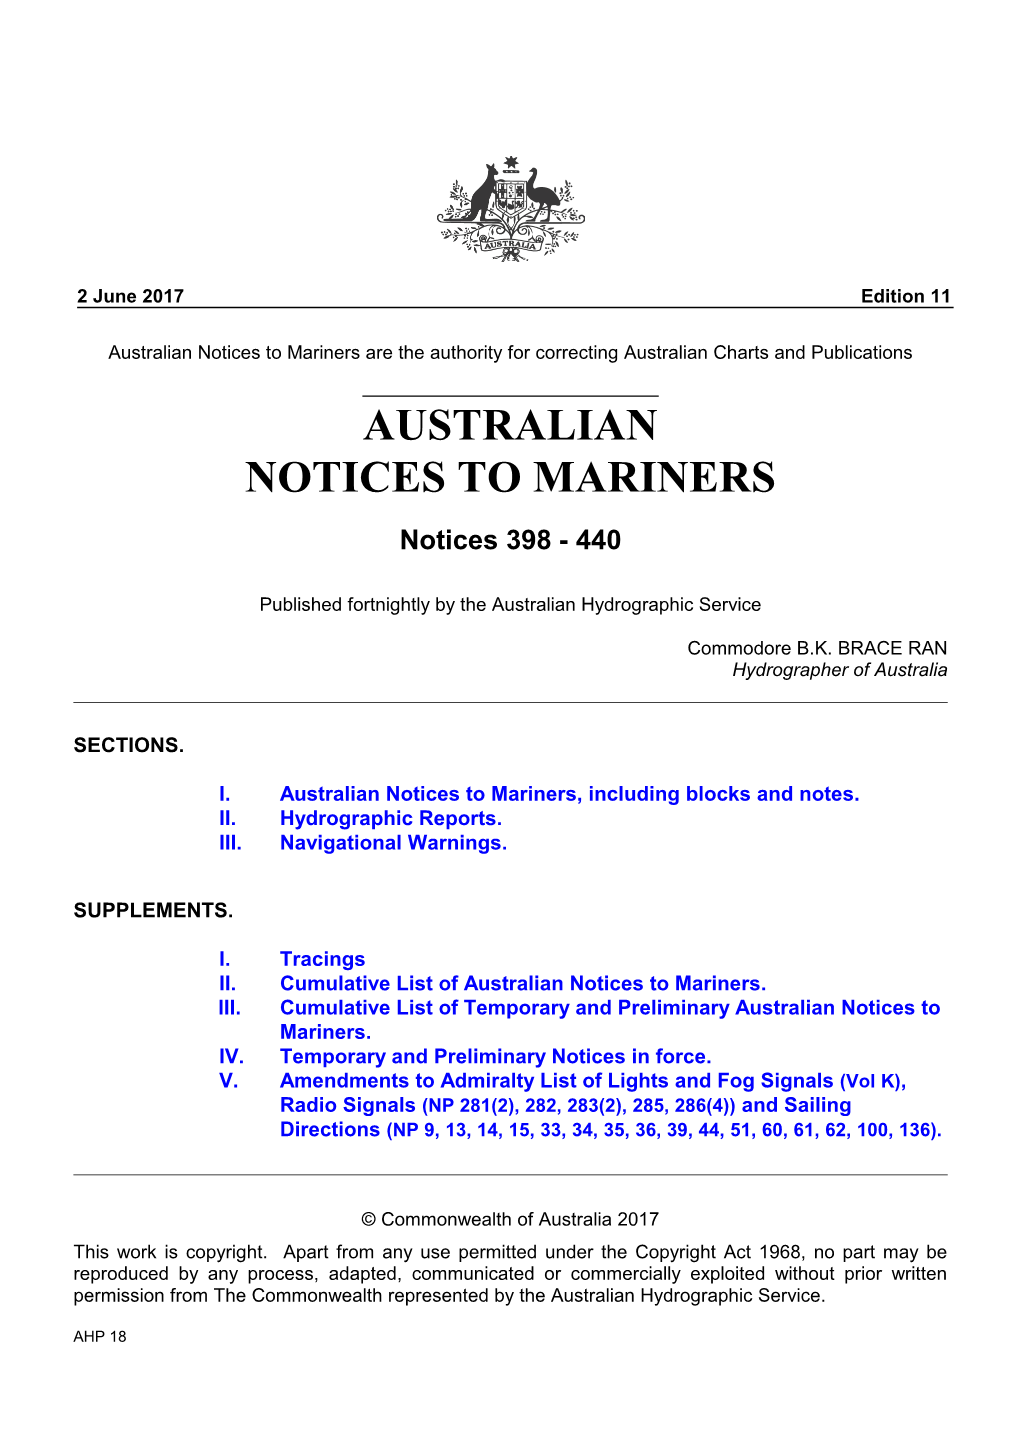 Australian Notices to Mariners Are the Authority for Correcting Australian Charts and Publications AUSTRALIAN NOTICES to MARINERS Notices 398 - 440